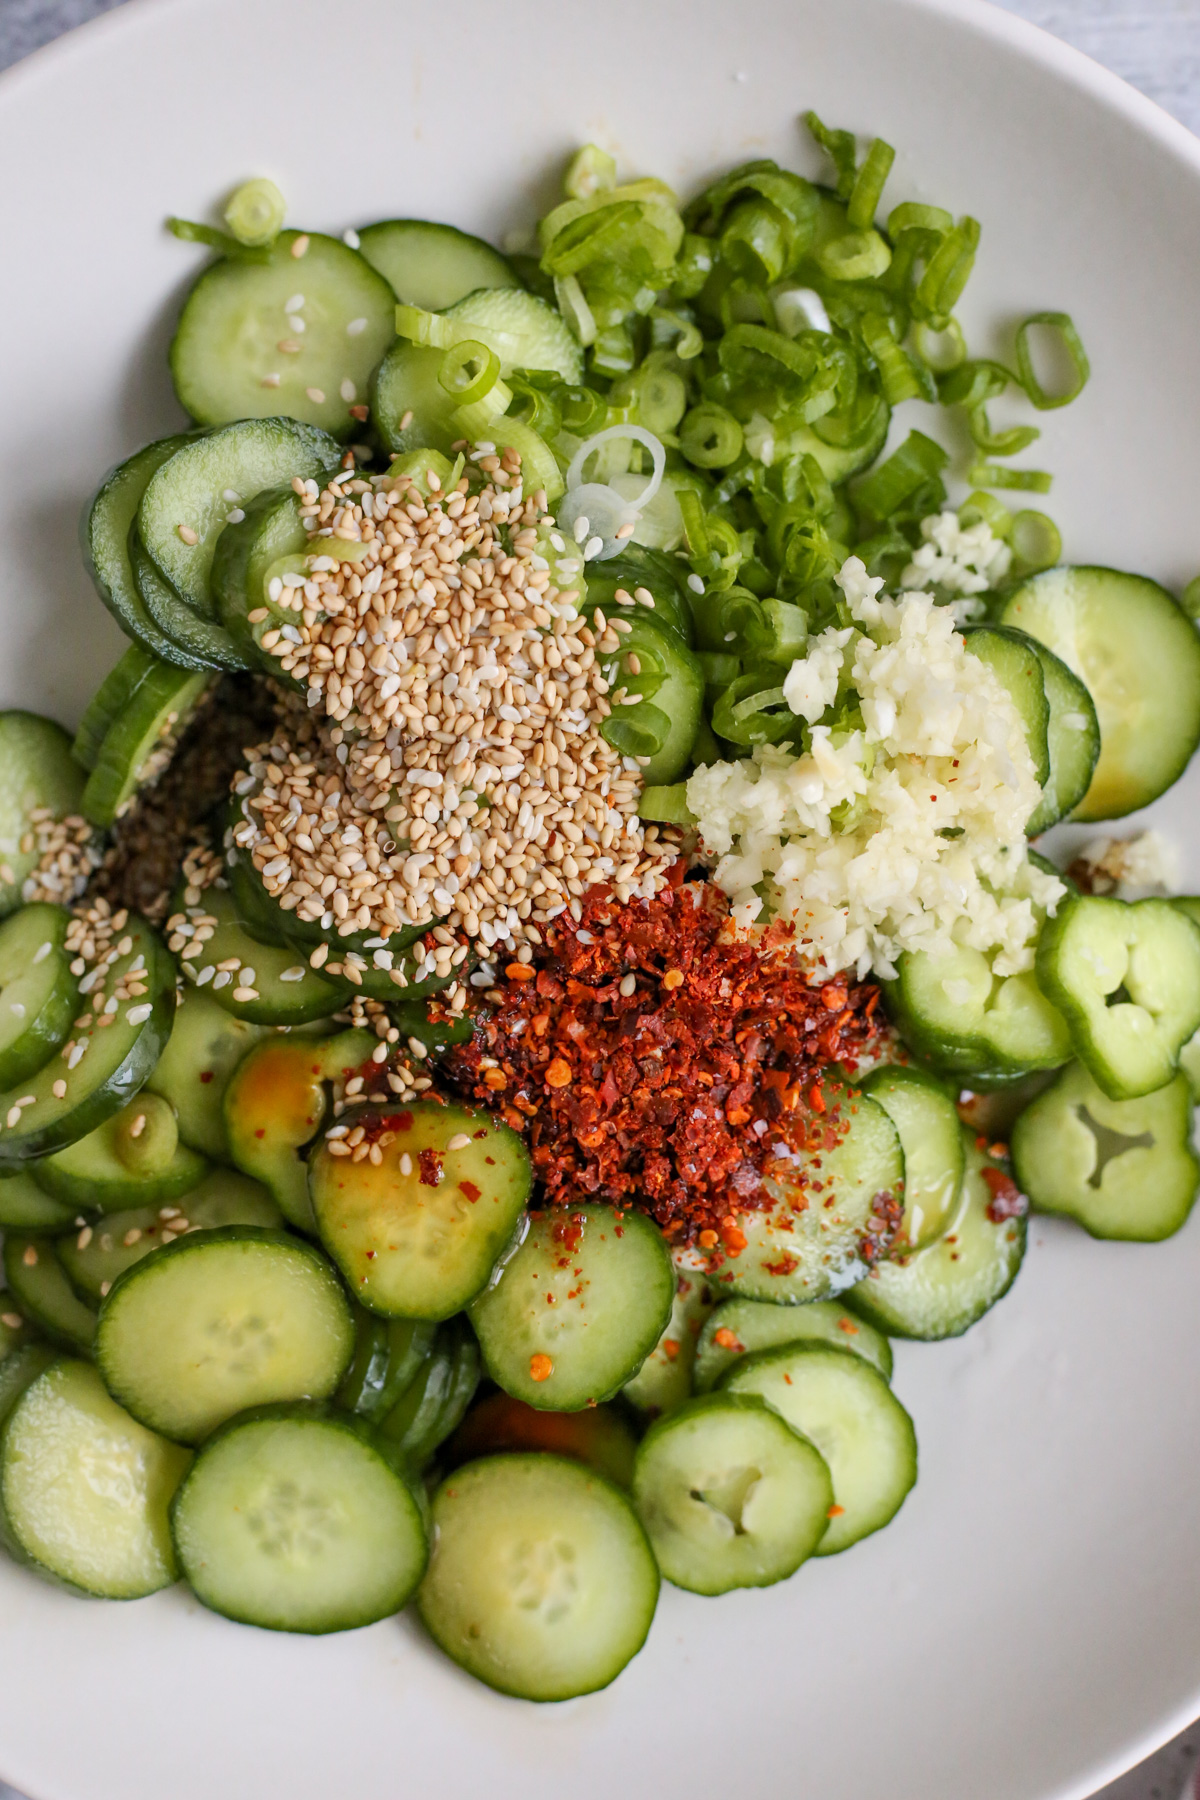 Overhead view of a mixing bowl filled with sliced cucumbers, minced garlic, toasted sesame seeds, red pepper flakes (gochugaru), and sliced green onion